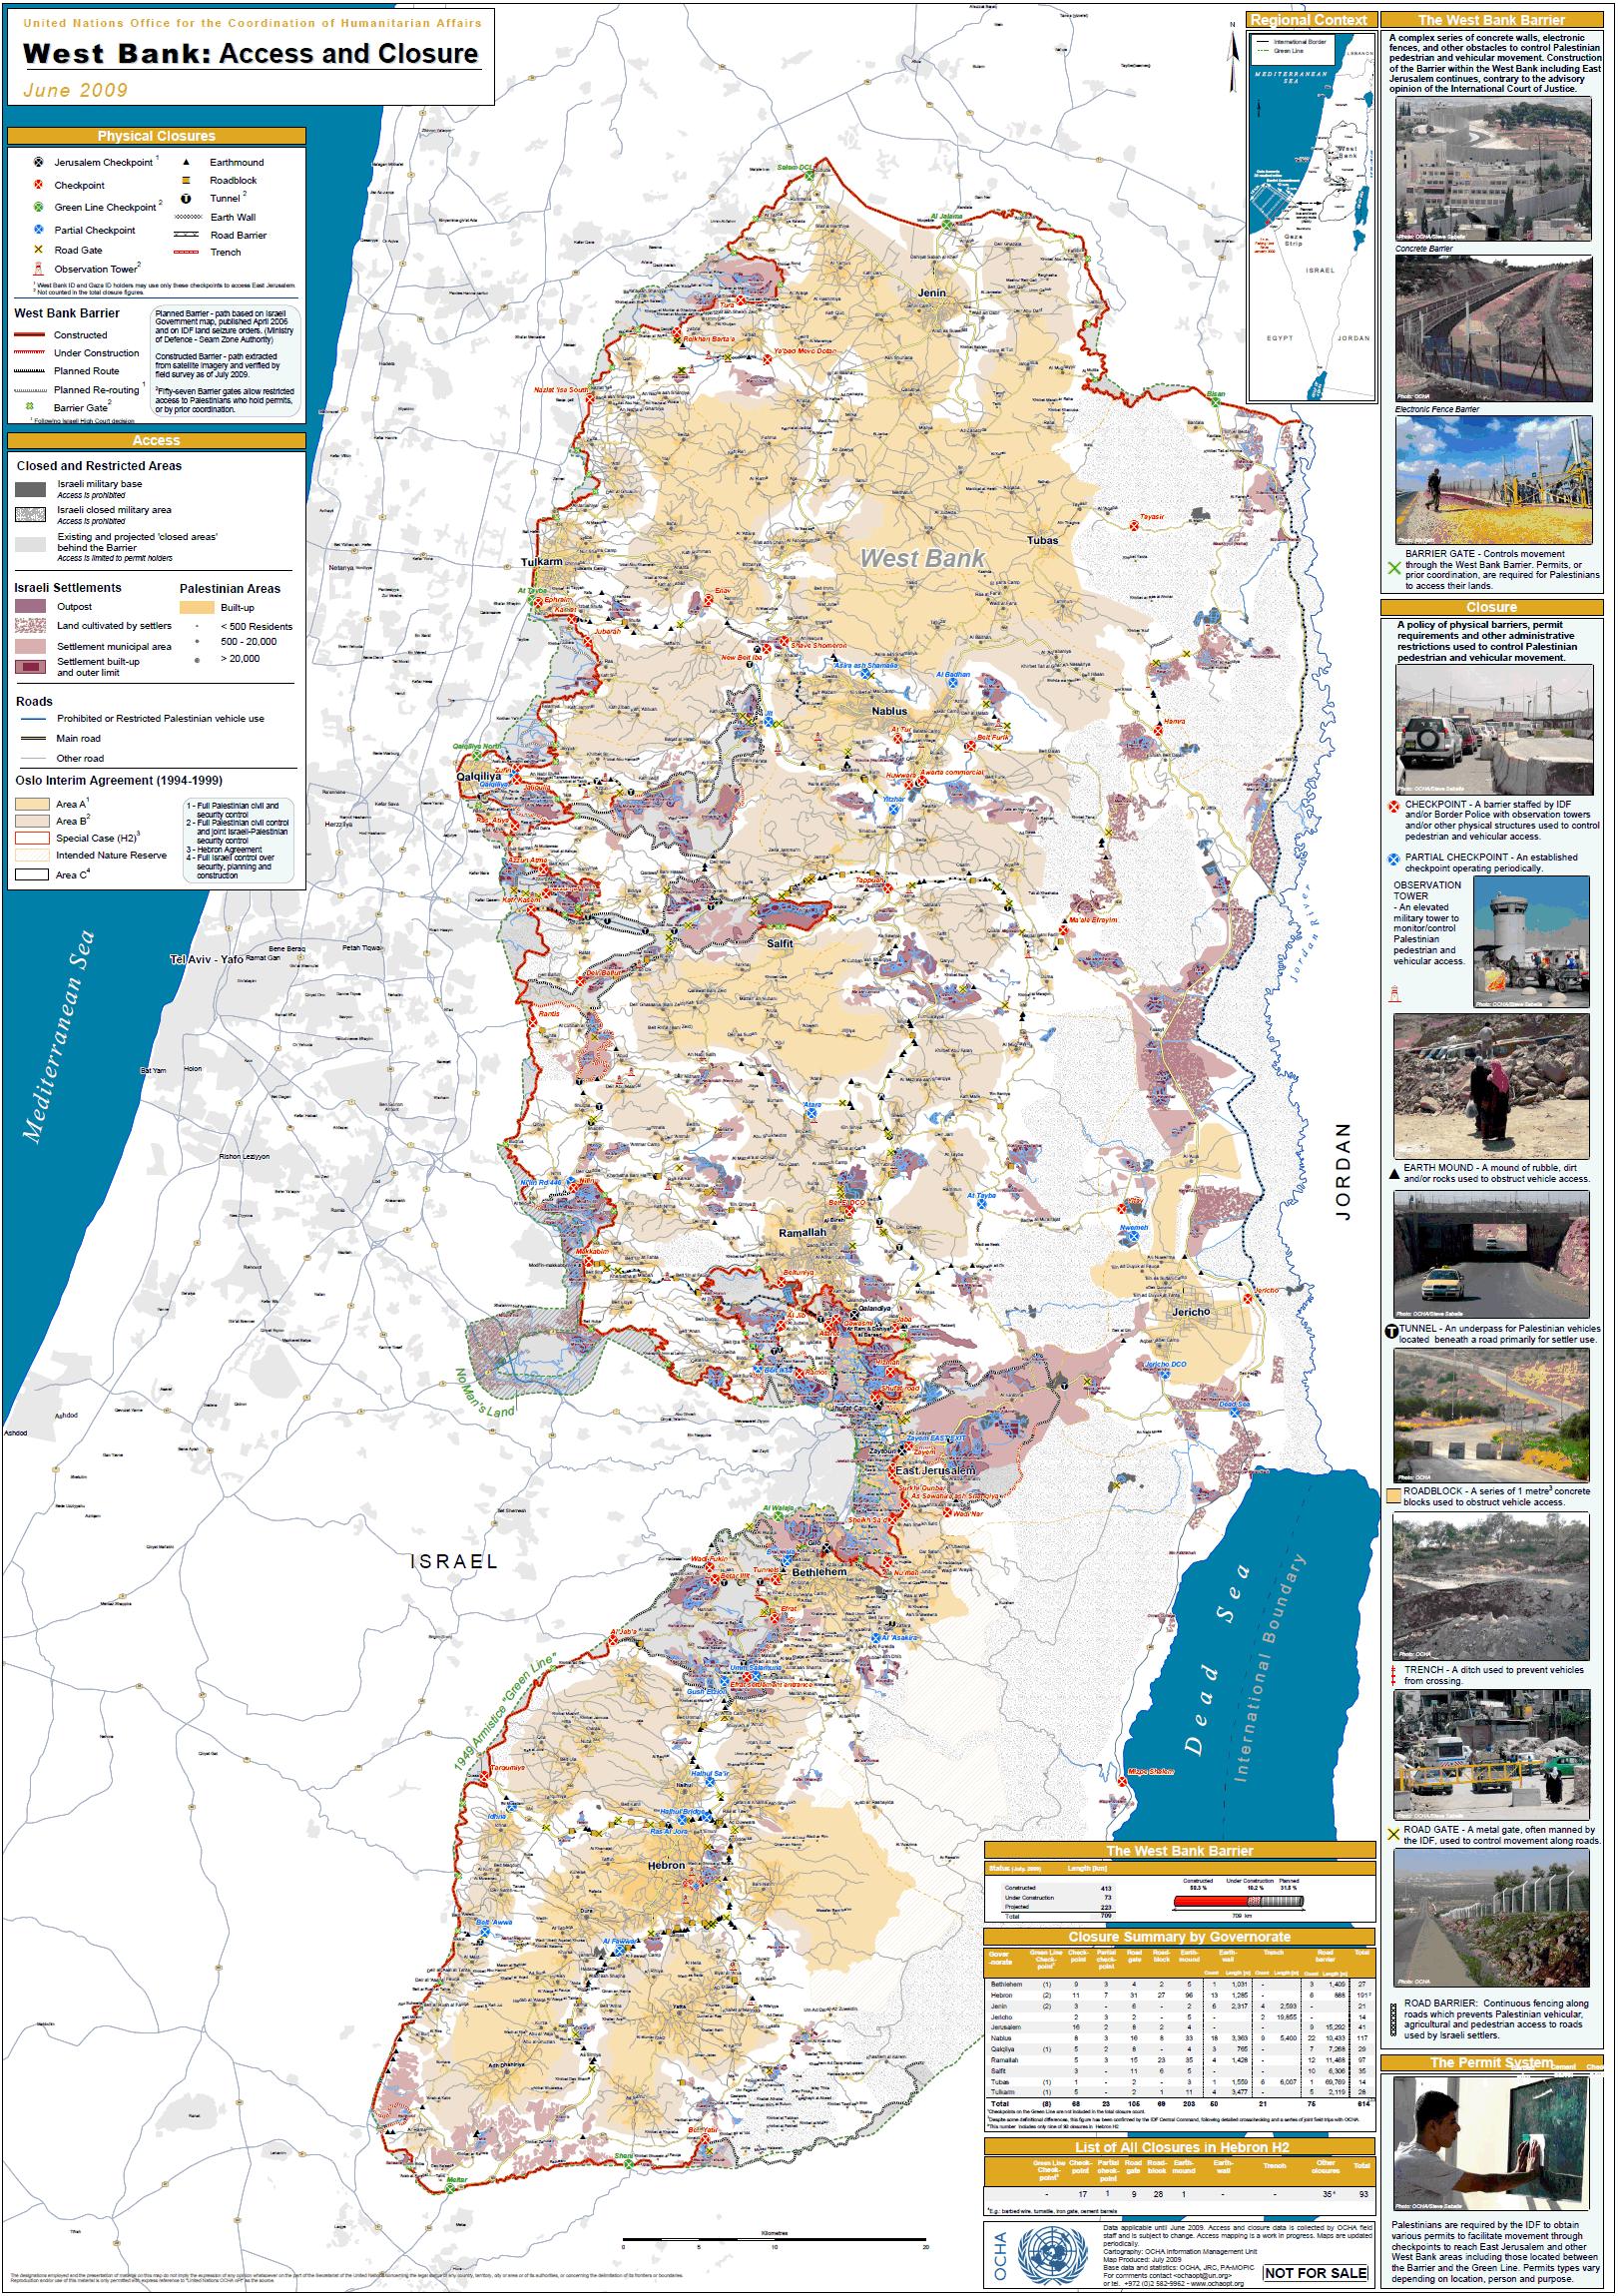 west bank on map of middle east